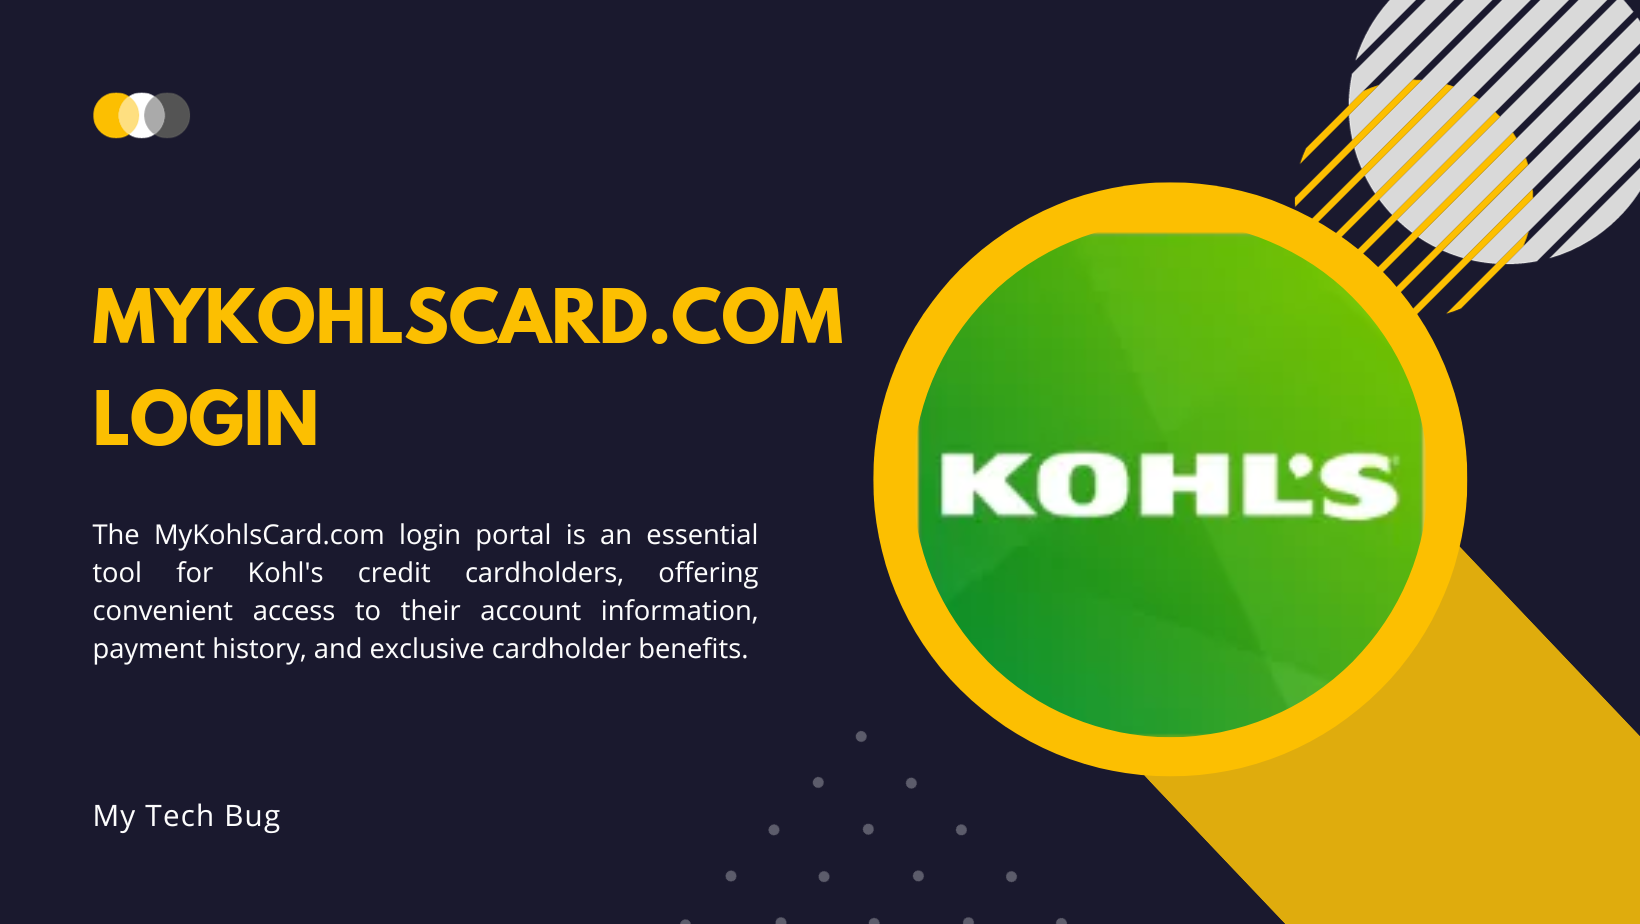 MyKohlsCard.com Login: A Comprehensive Guide to Accessing Your Kohl’s Credit Card Account